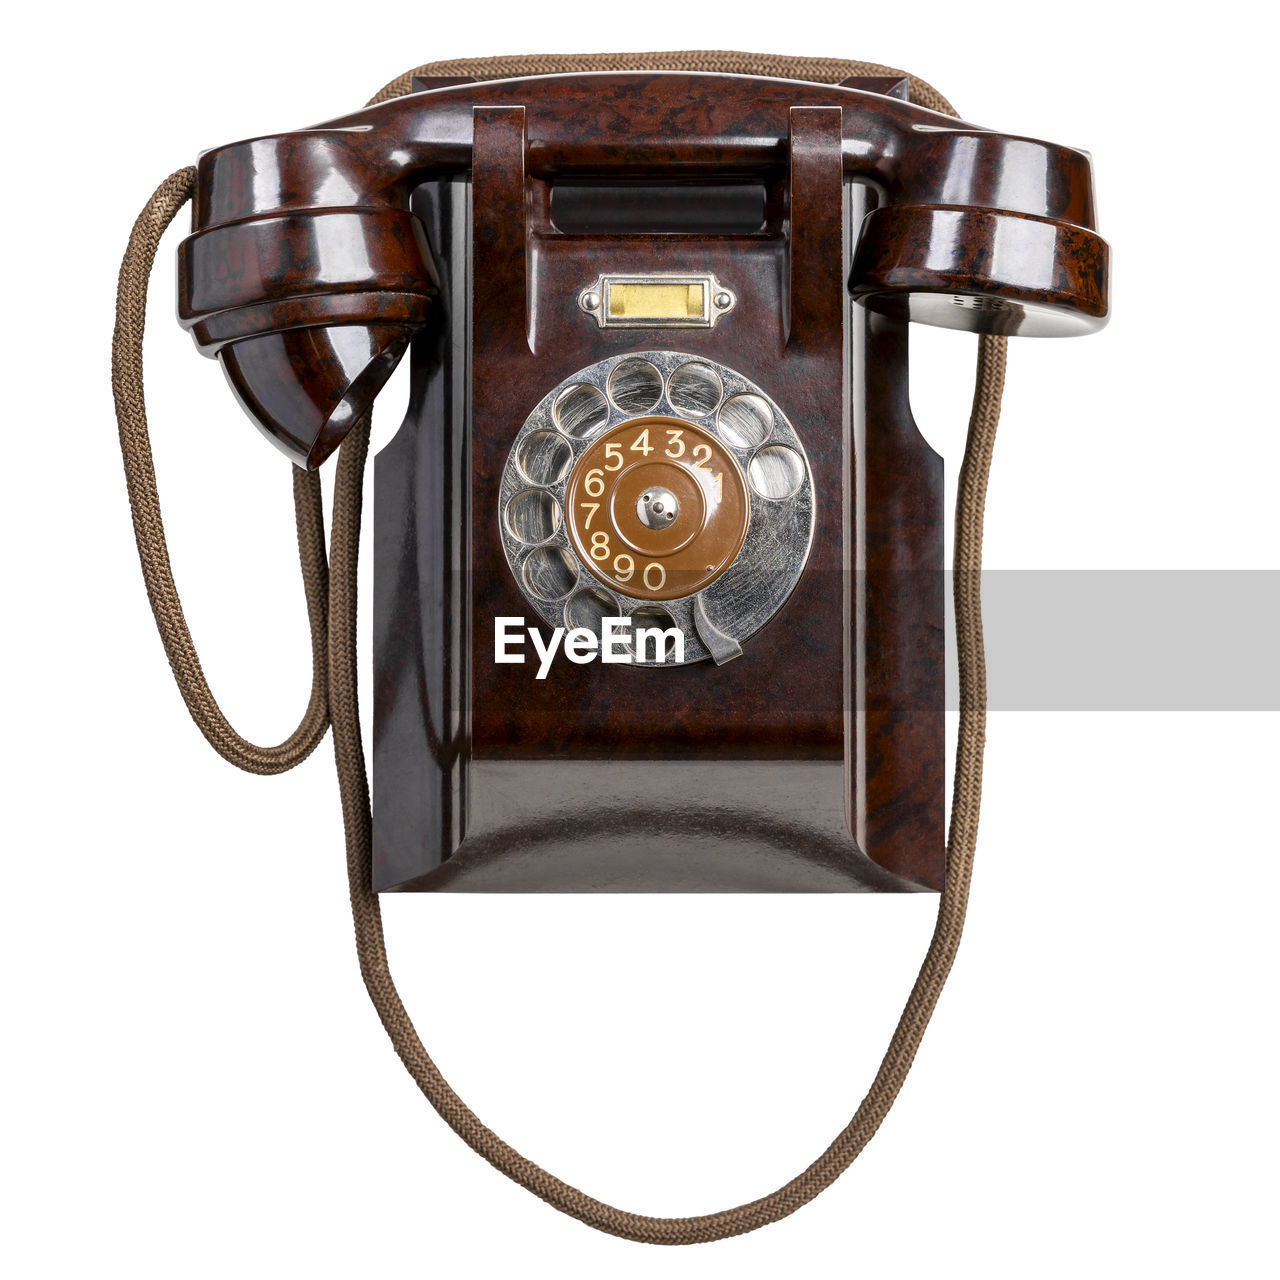 corded phone, telephone, technology, retro styled, white background, communication, single object, cut out, brown, nostalgia, rotary phone, landline phone, telephone receiver, history, indoors, the past, old, no people, studio shot, number